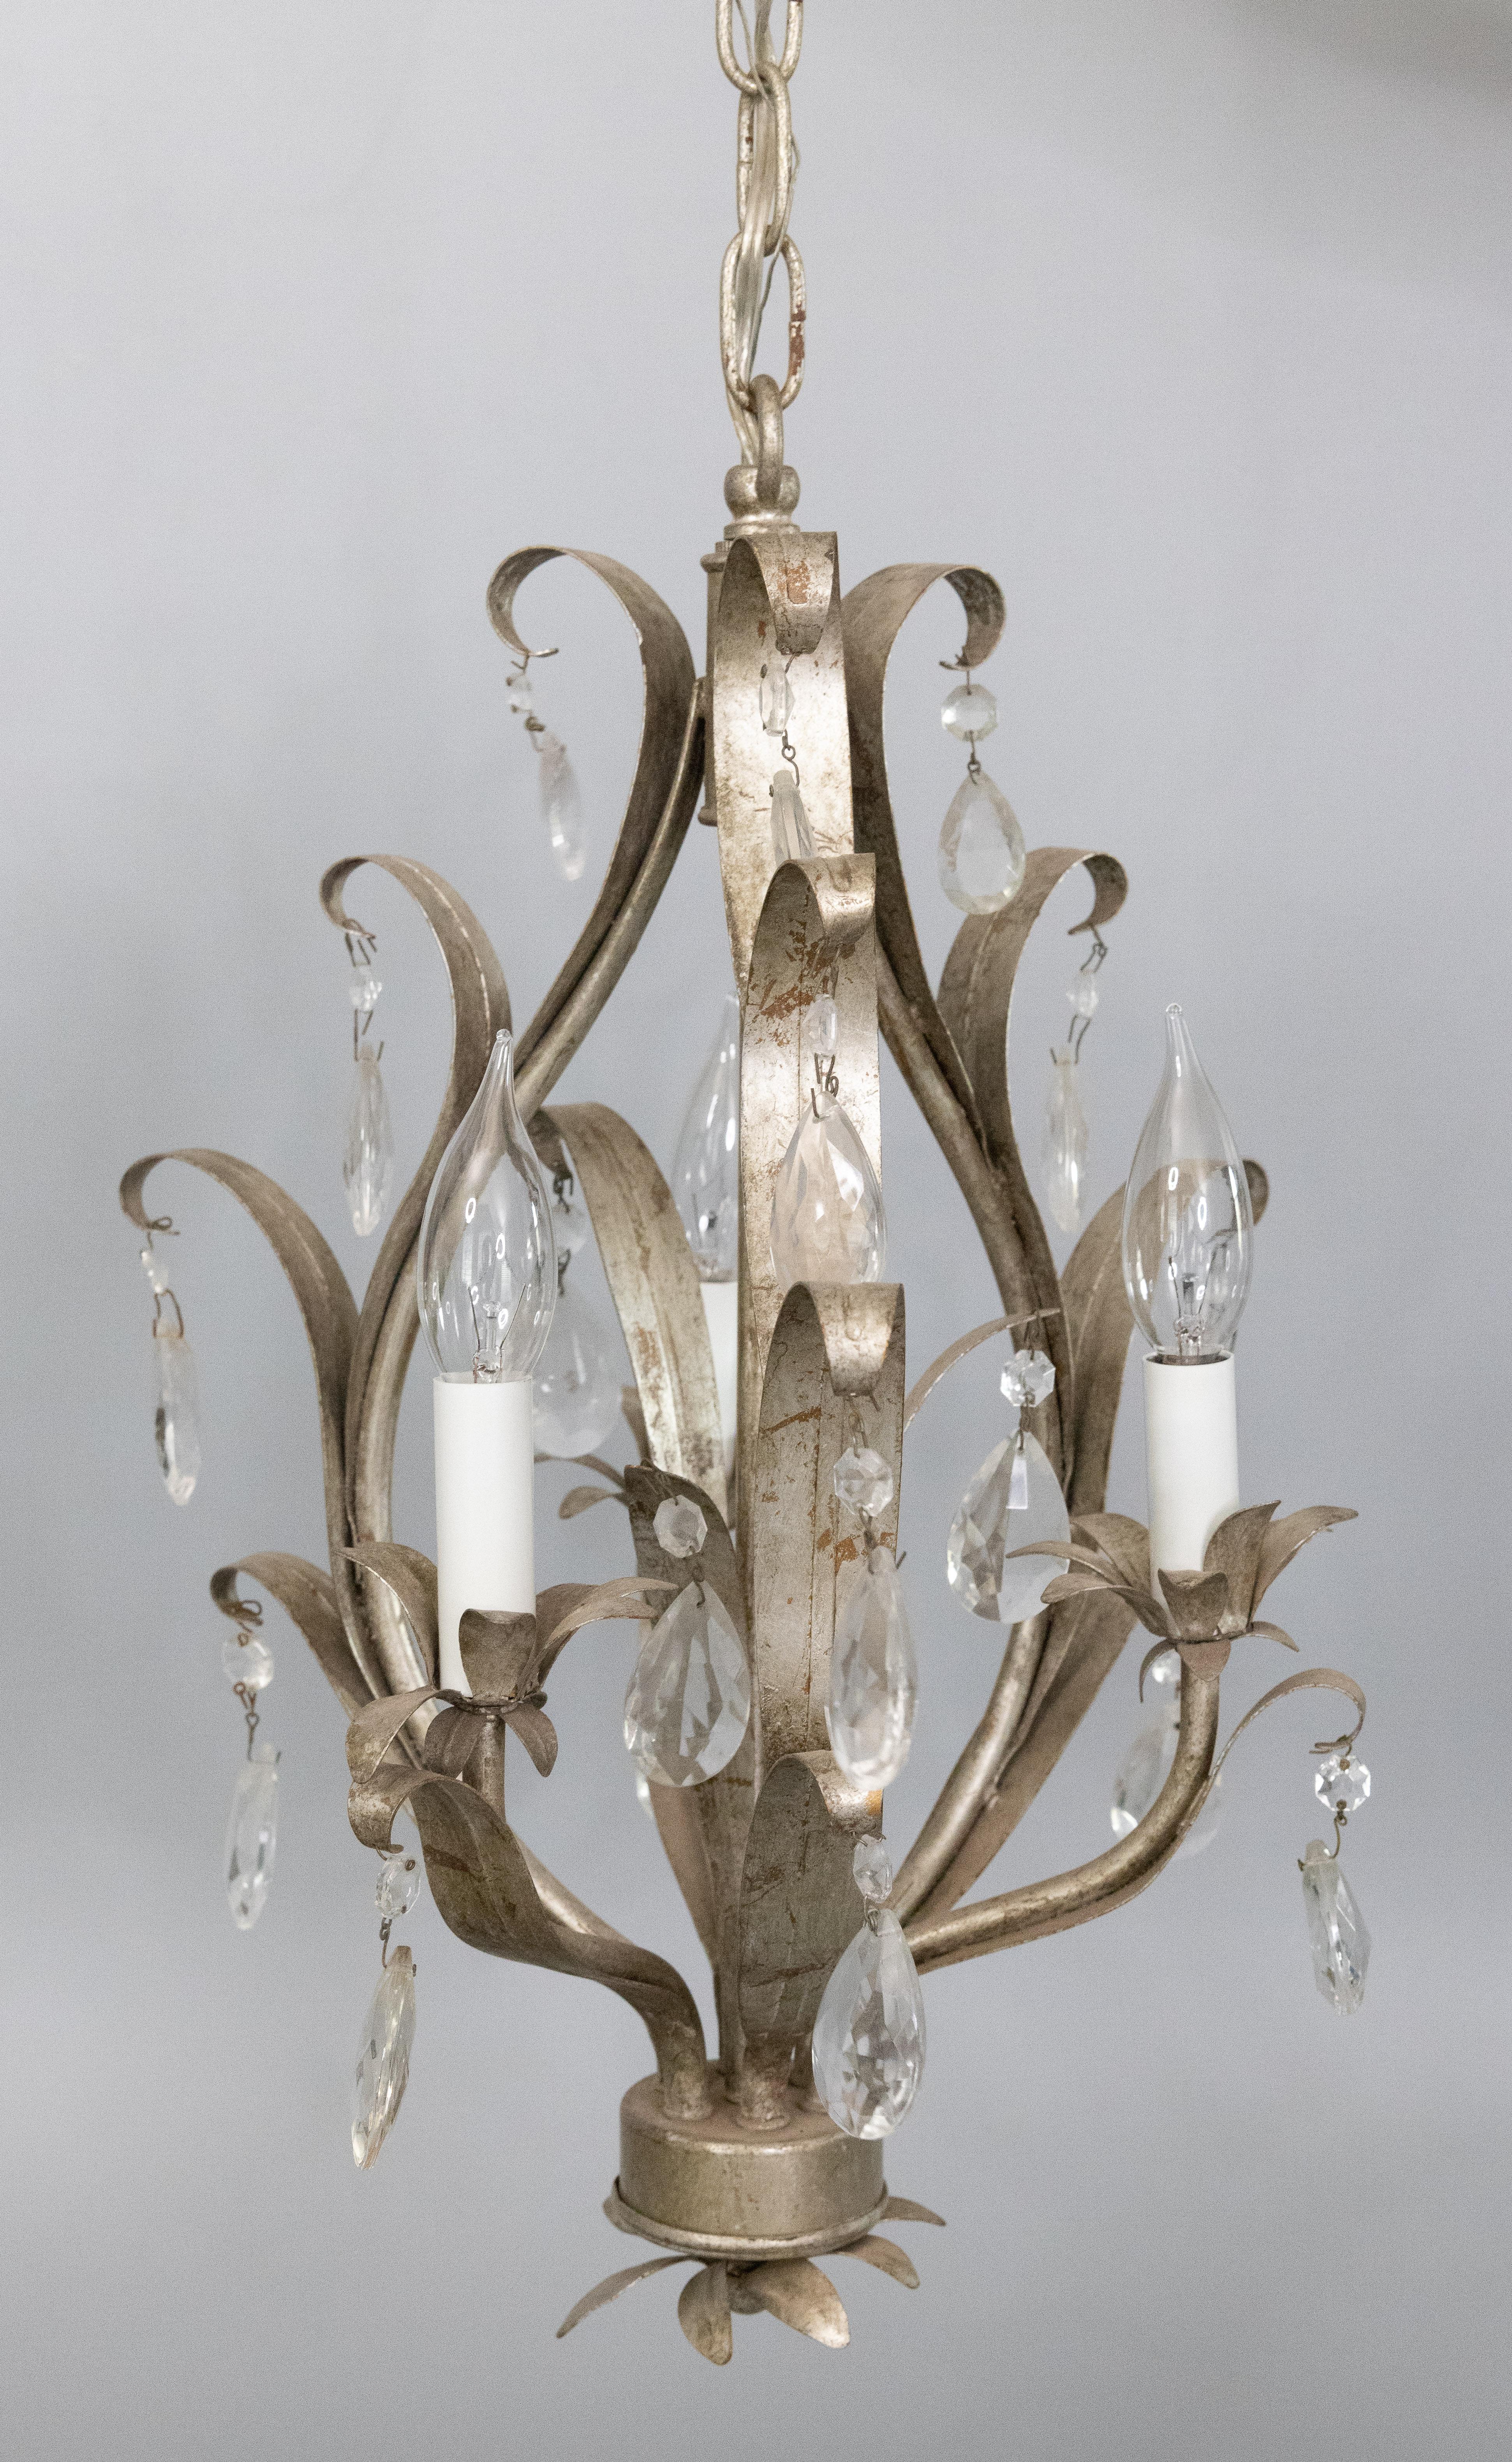 A stunning mid-20th century Italian silver tone gilded tole three light chandelier. This gorgeous chandelier has crystals and scrolling leaves in a beautiful silver gilt patina. It's in excellent working condition and comes with the original ceiling